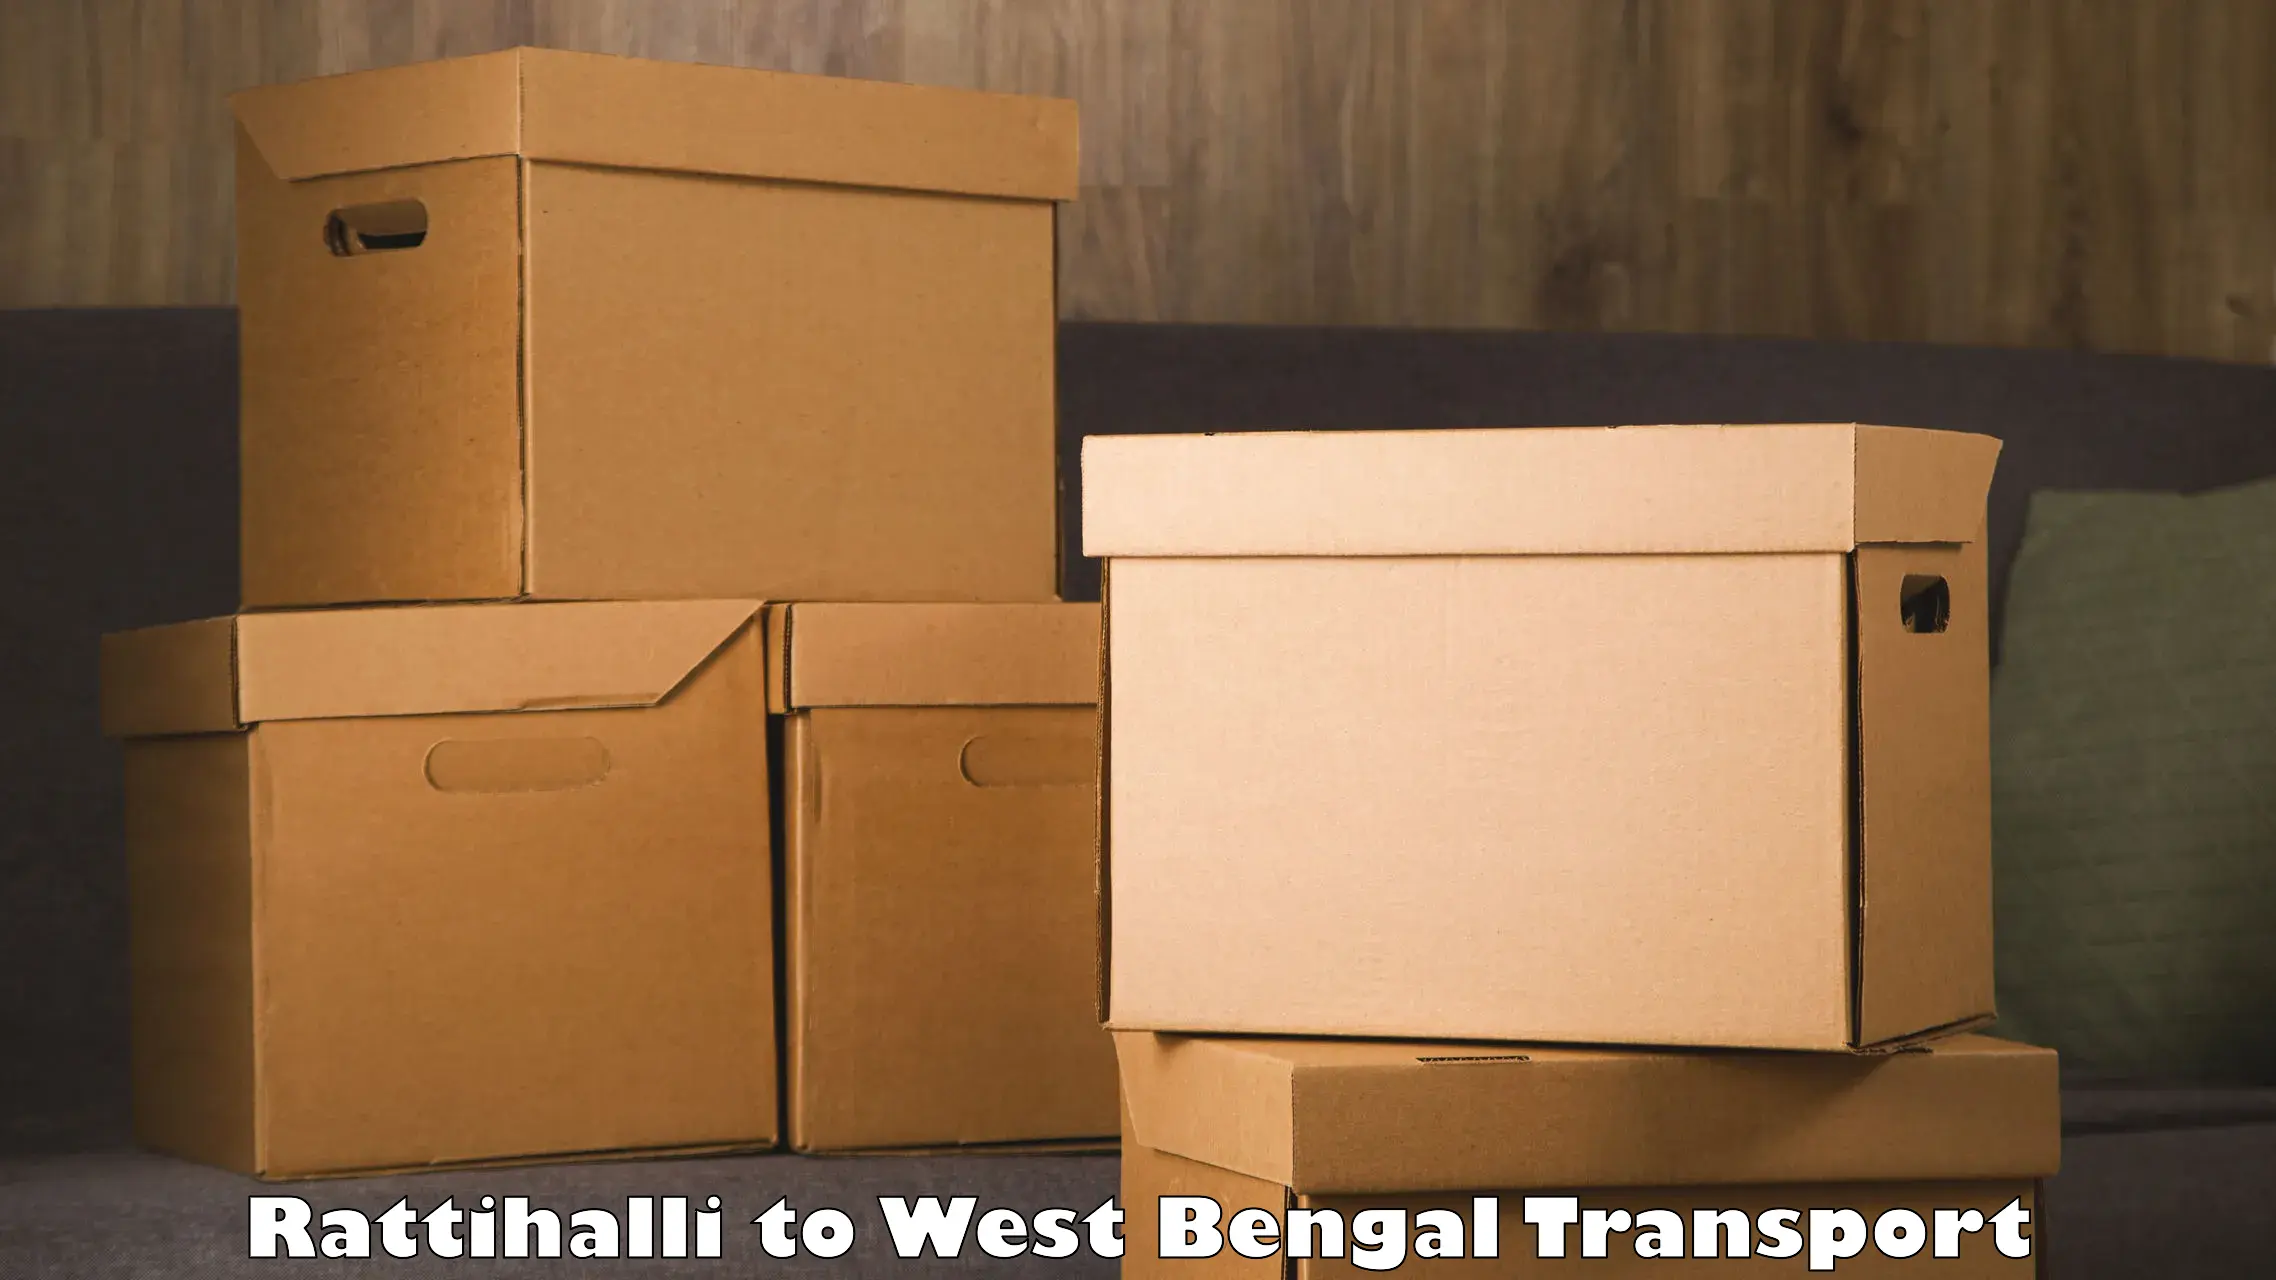 Container transport service Rattihalli to Bagnan